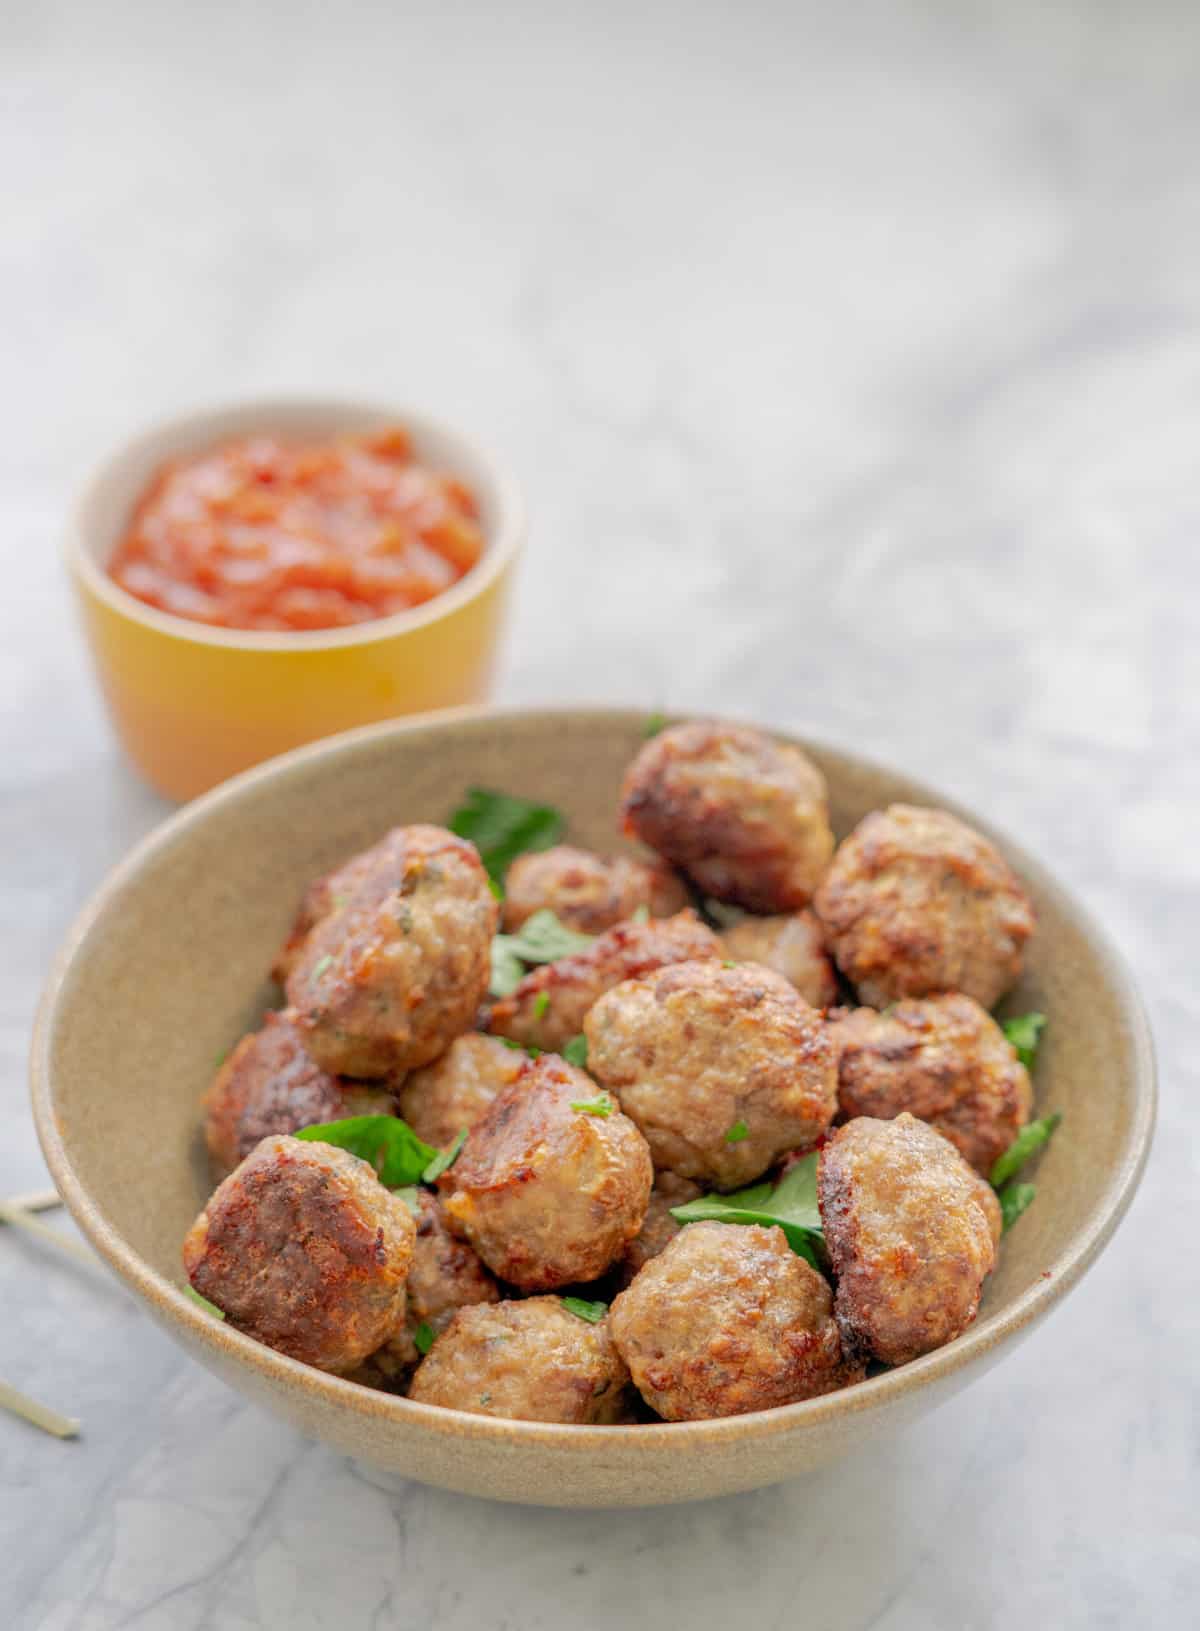 A ceramic serving bowl full of baked meatballs with a sprinkle of parsley next to a small ceramic serving dish of chutney